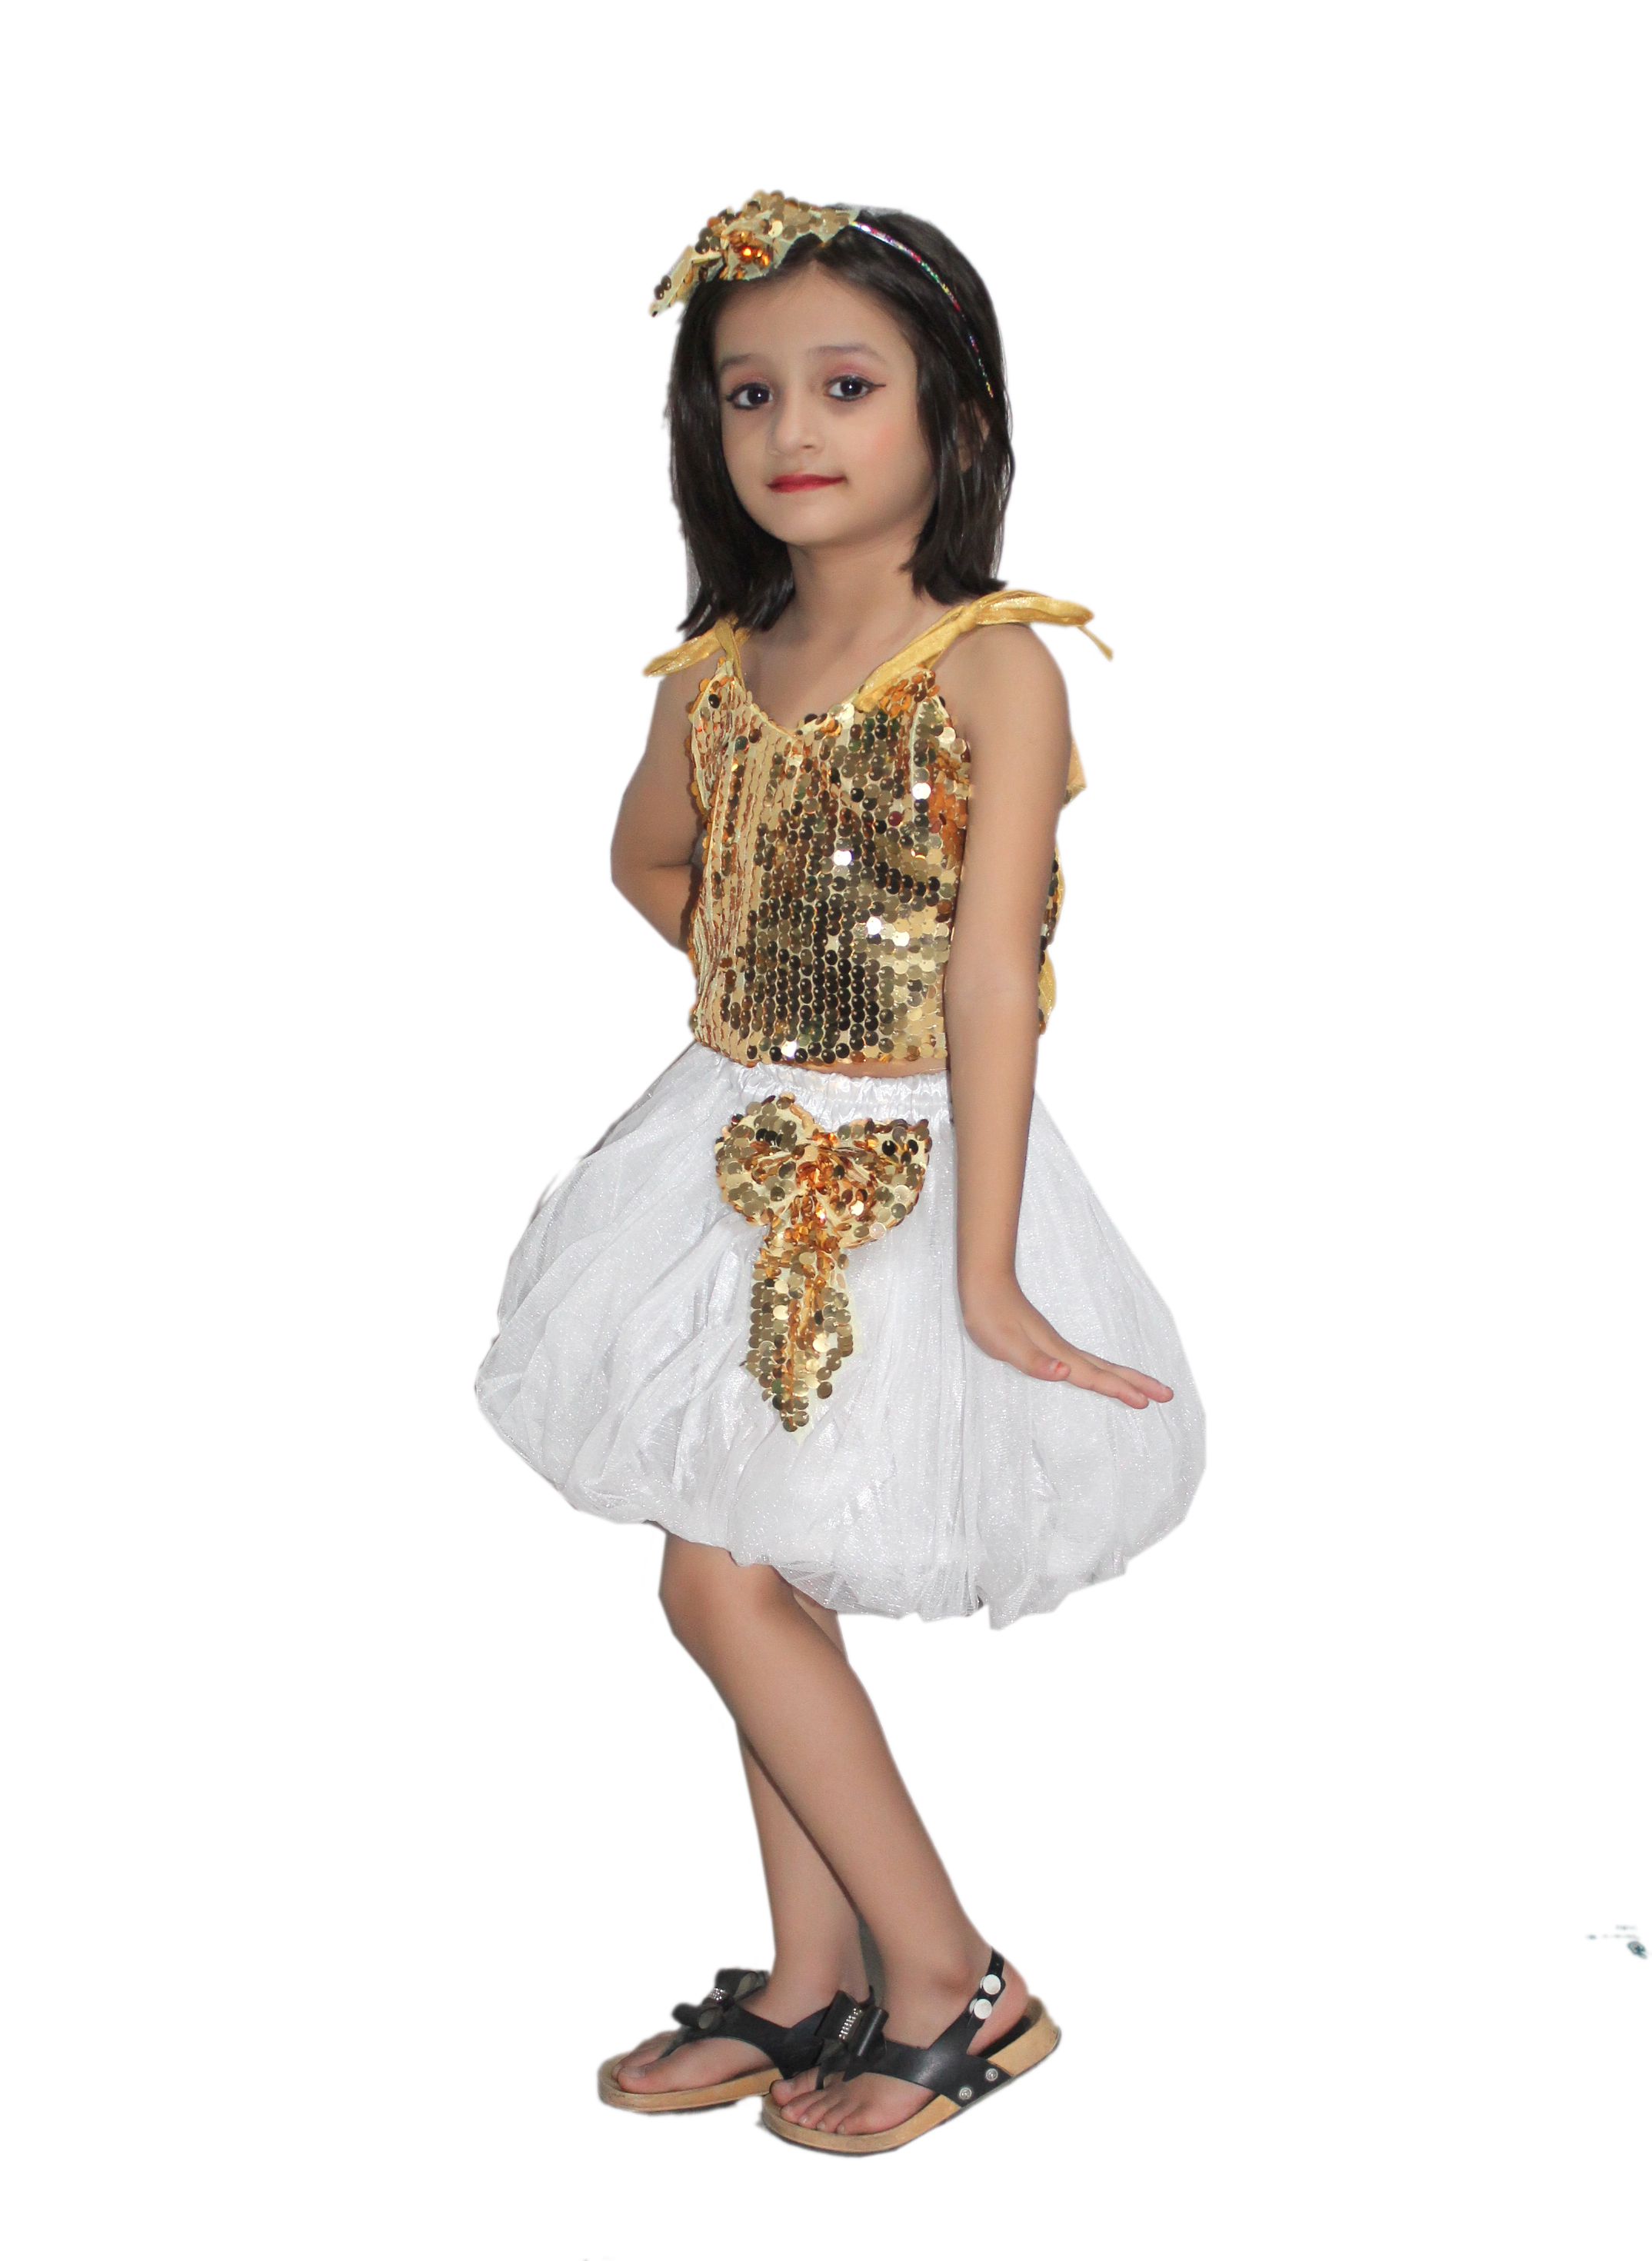     			Kaku Fancy Dresses Skirt Top Set Western Dance Dress For kids,Costume For School Annual function/Theme Party/Competition/Stage Shows Dress/Birthday Party Dress